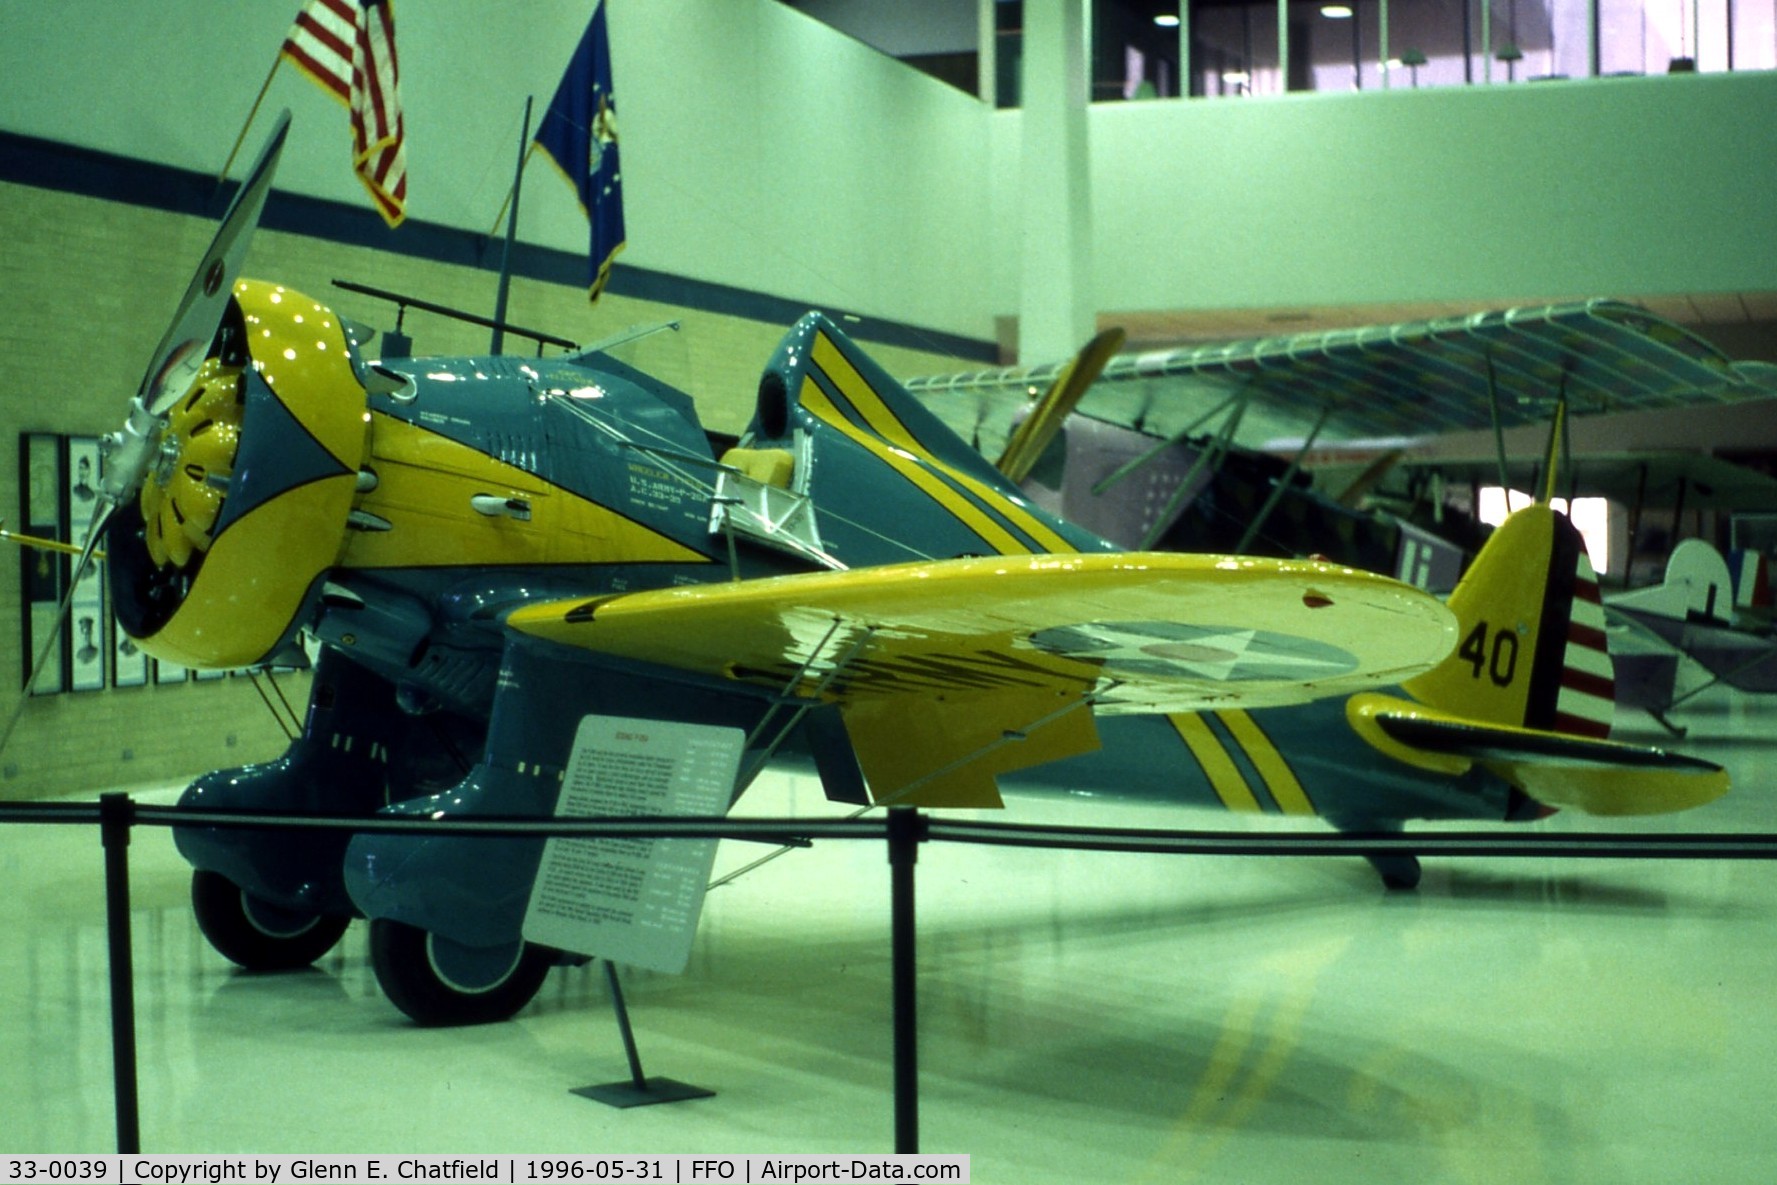 33-0039, 1933 Boeing P-26A Replica C/N 1815, P-26A reproduction at the National Museum of the U.S. Air Force